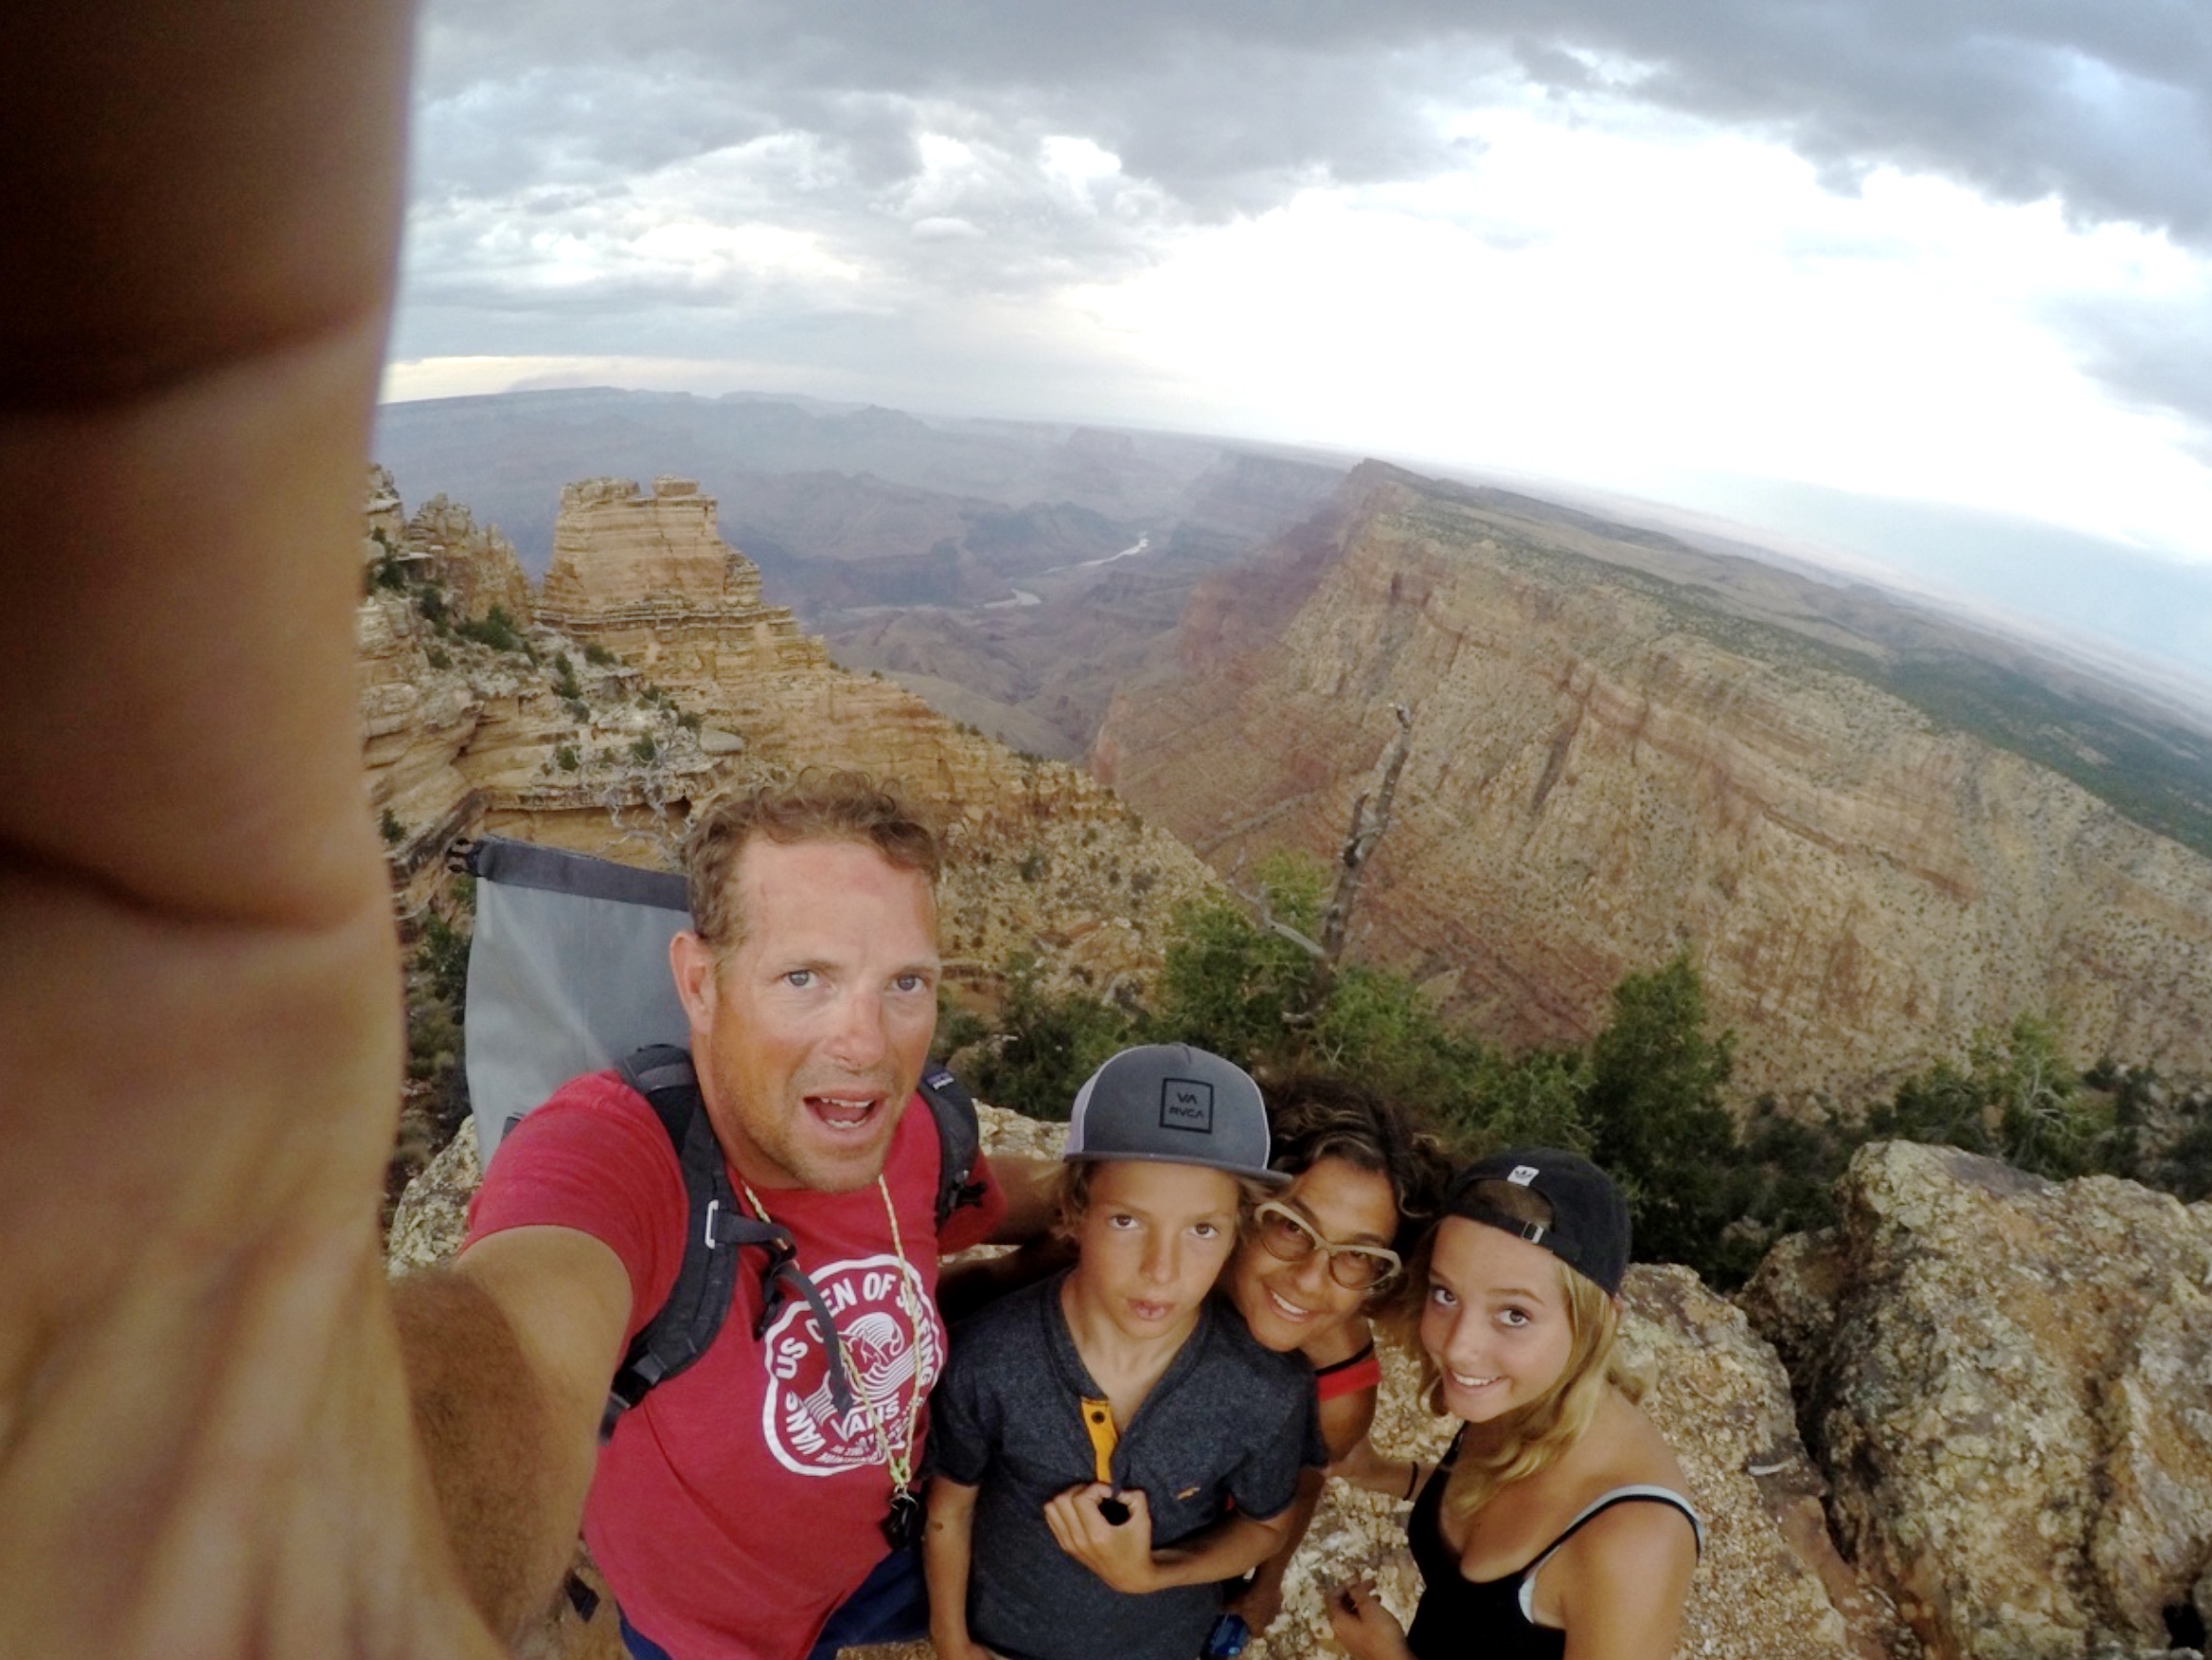 Family selfie with canyons and river below.